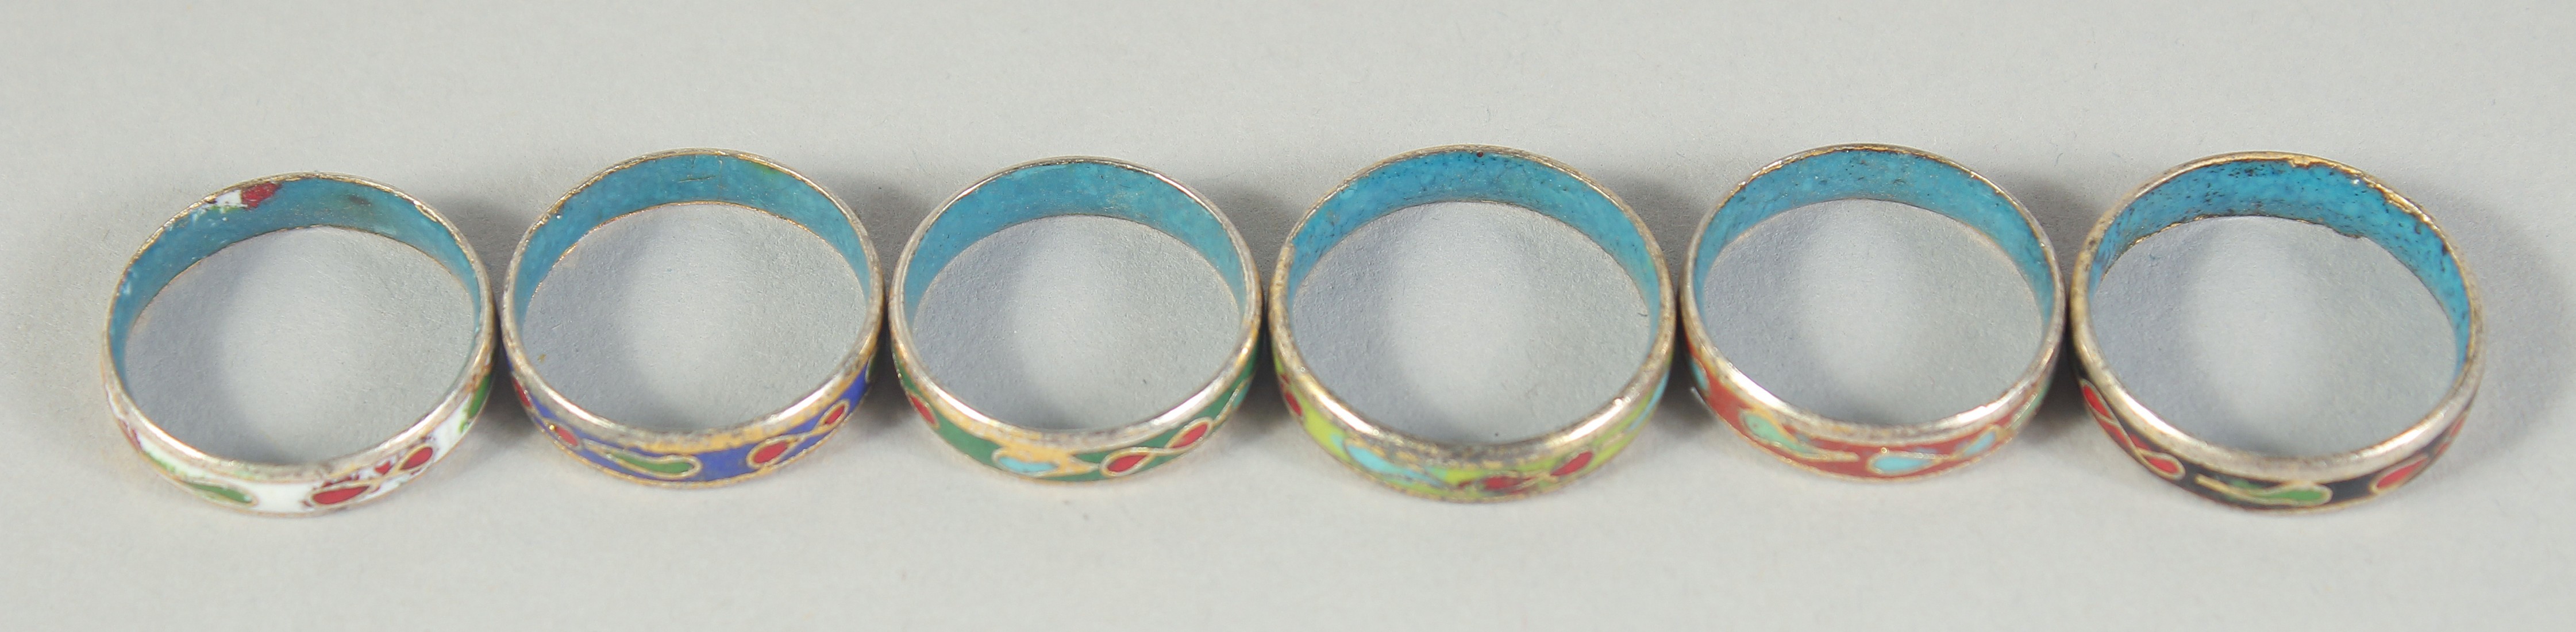 SIX CLOISONNE RINGS - Image 2 of 2